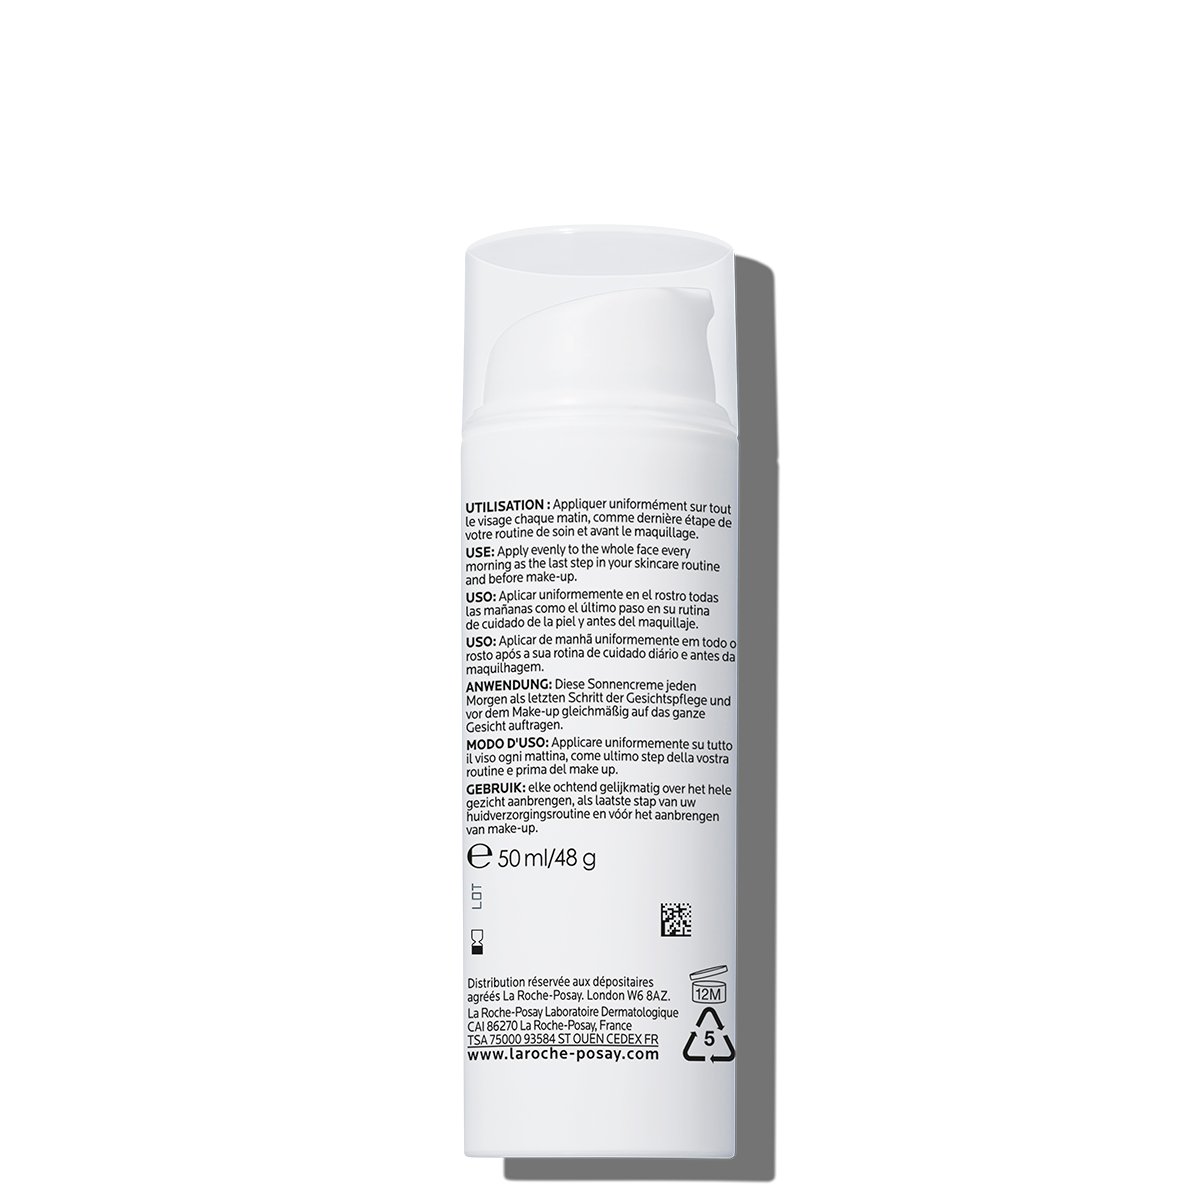 La-Roche-Posay-Anthelios-Age-Correct-SPF50-50ml-NoTeinted-LD-000-3337875761031-Closed-BSS